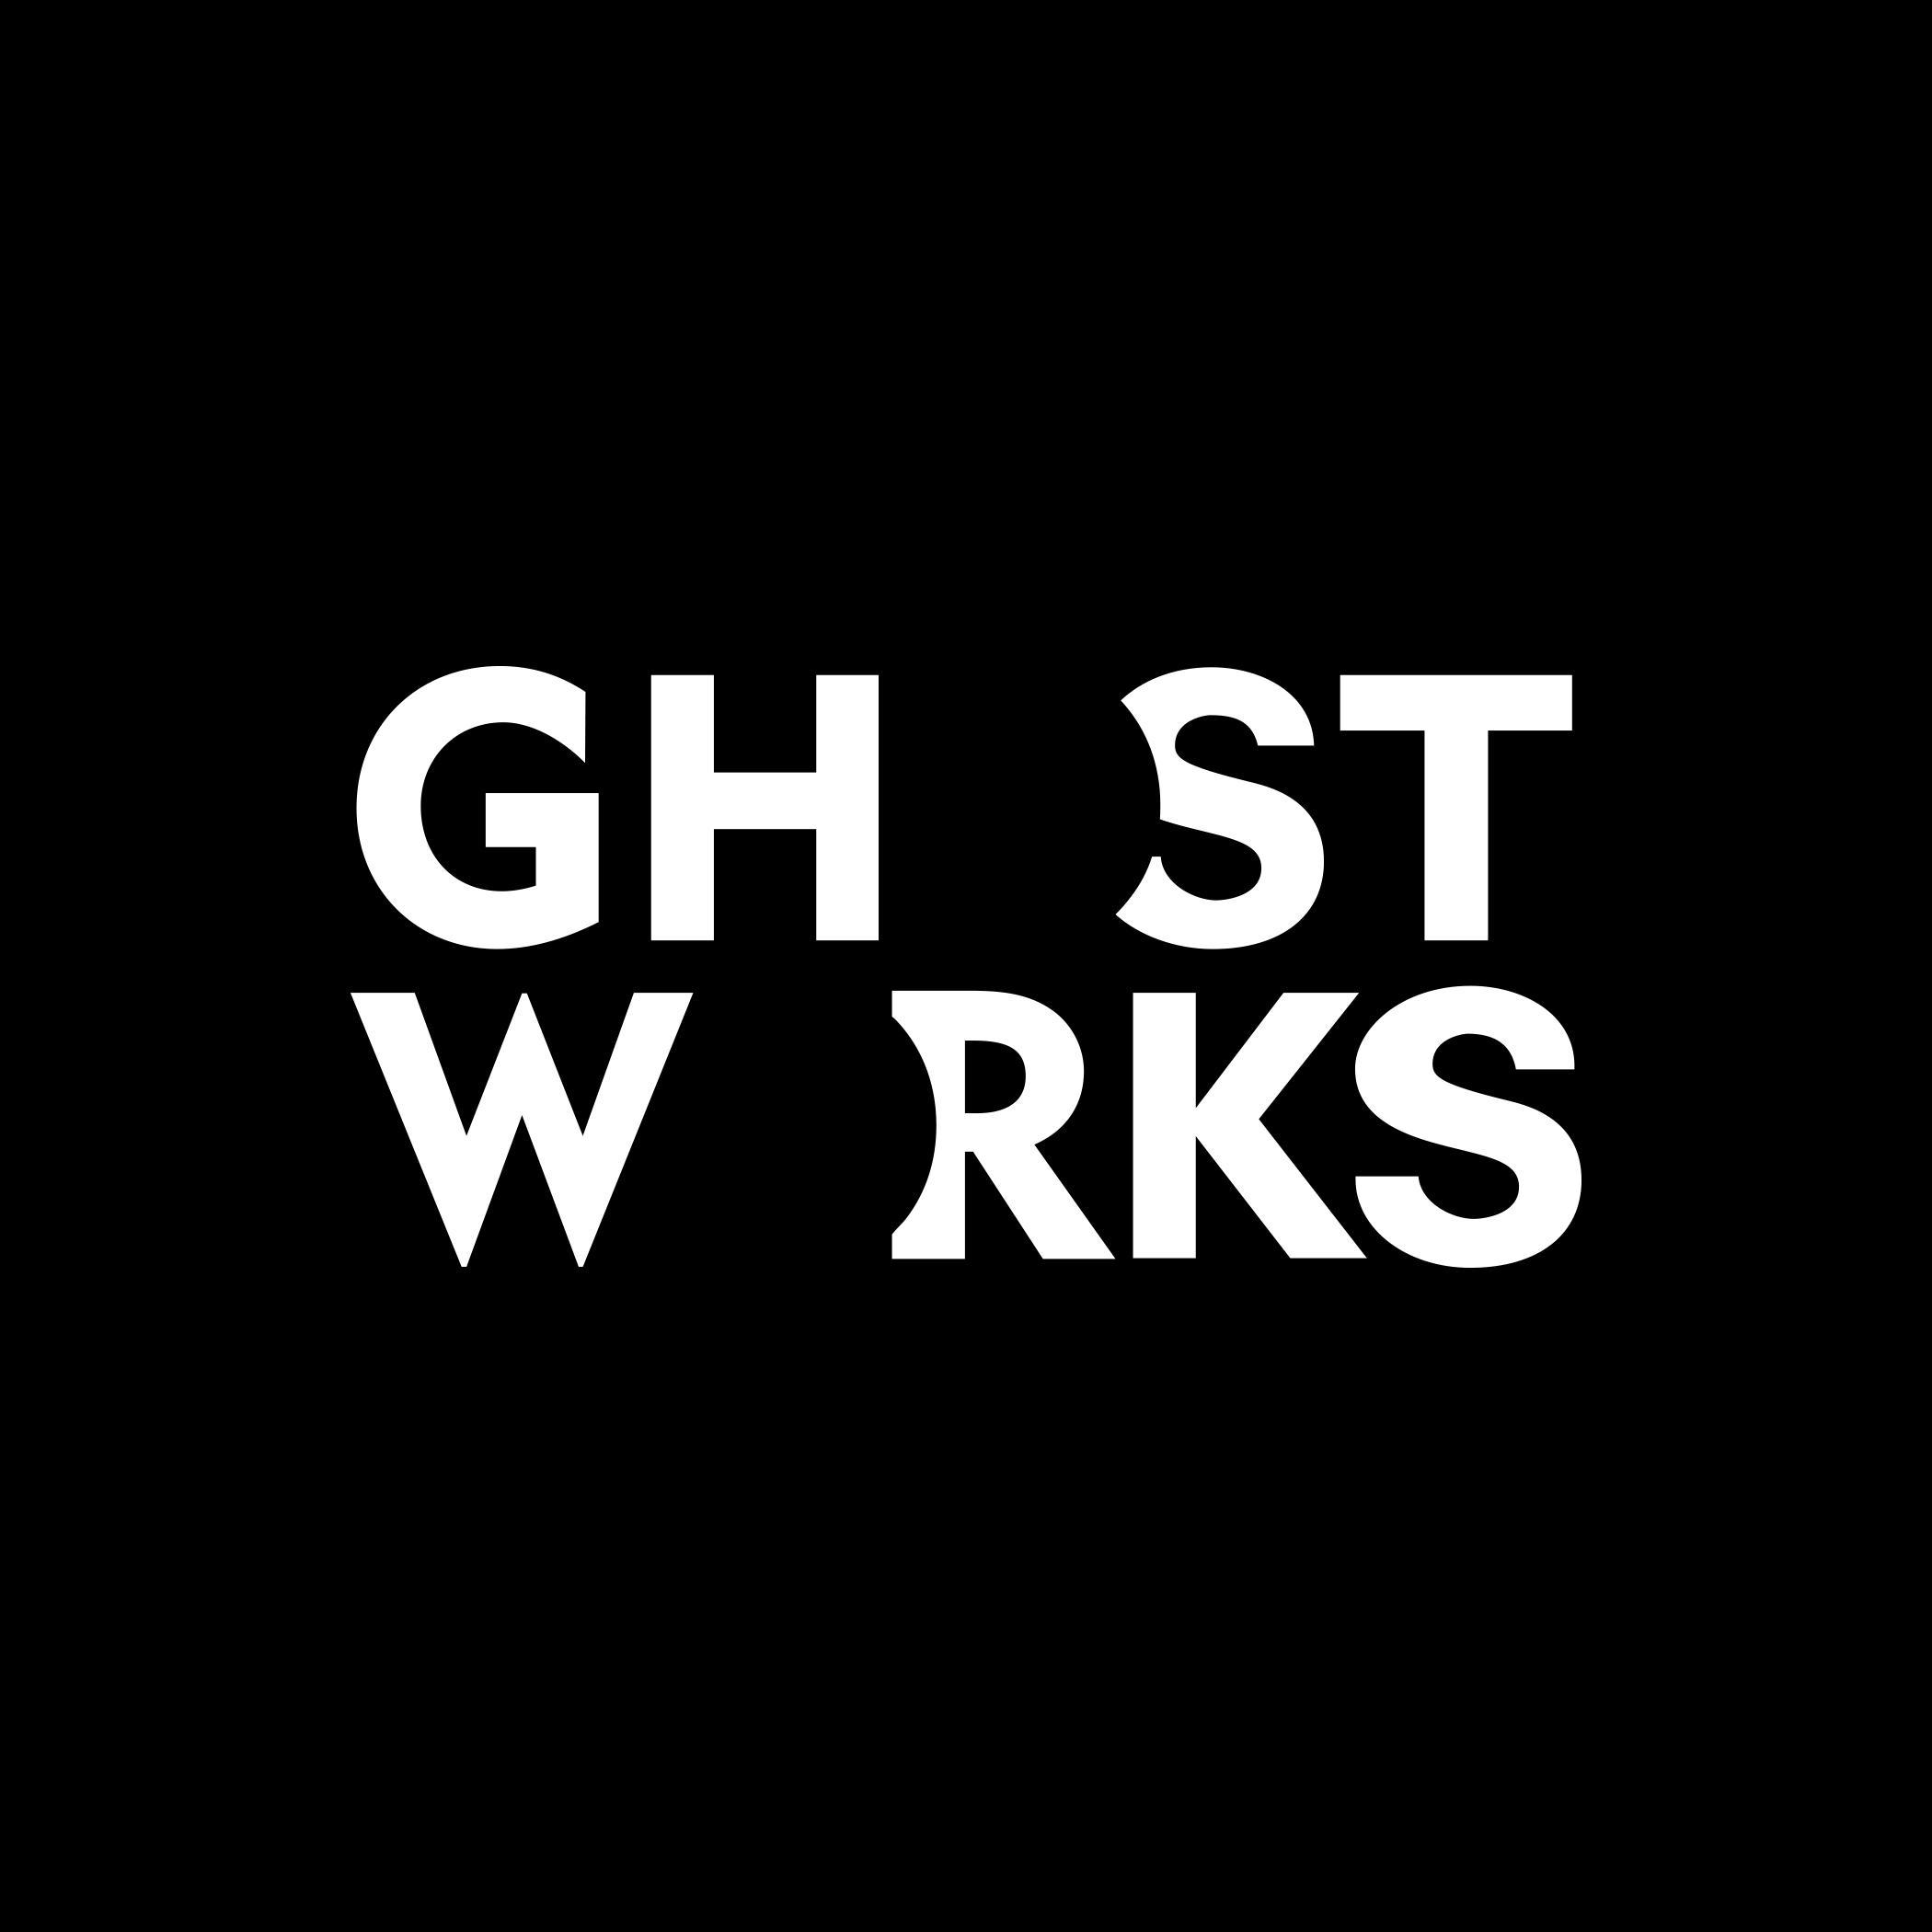 GHOST WORKS